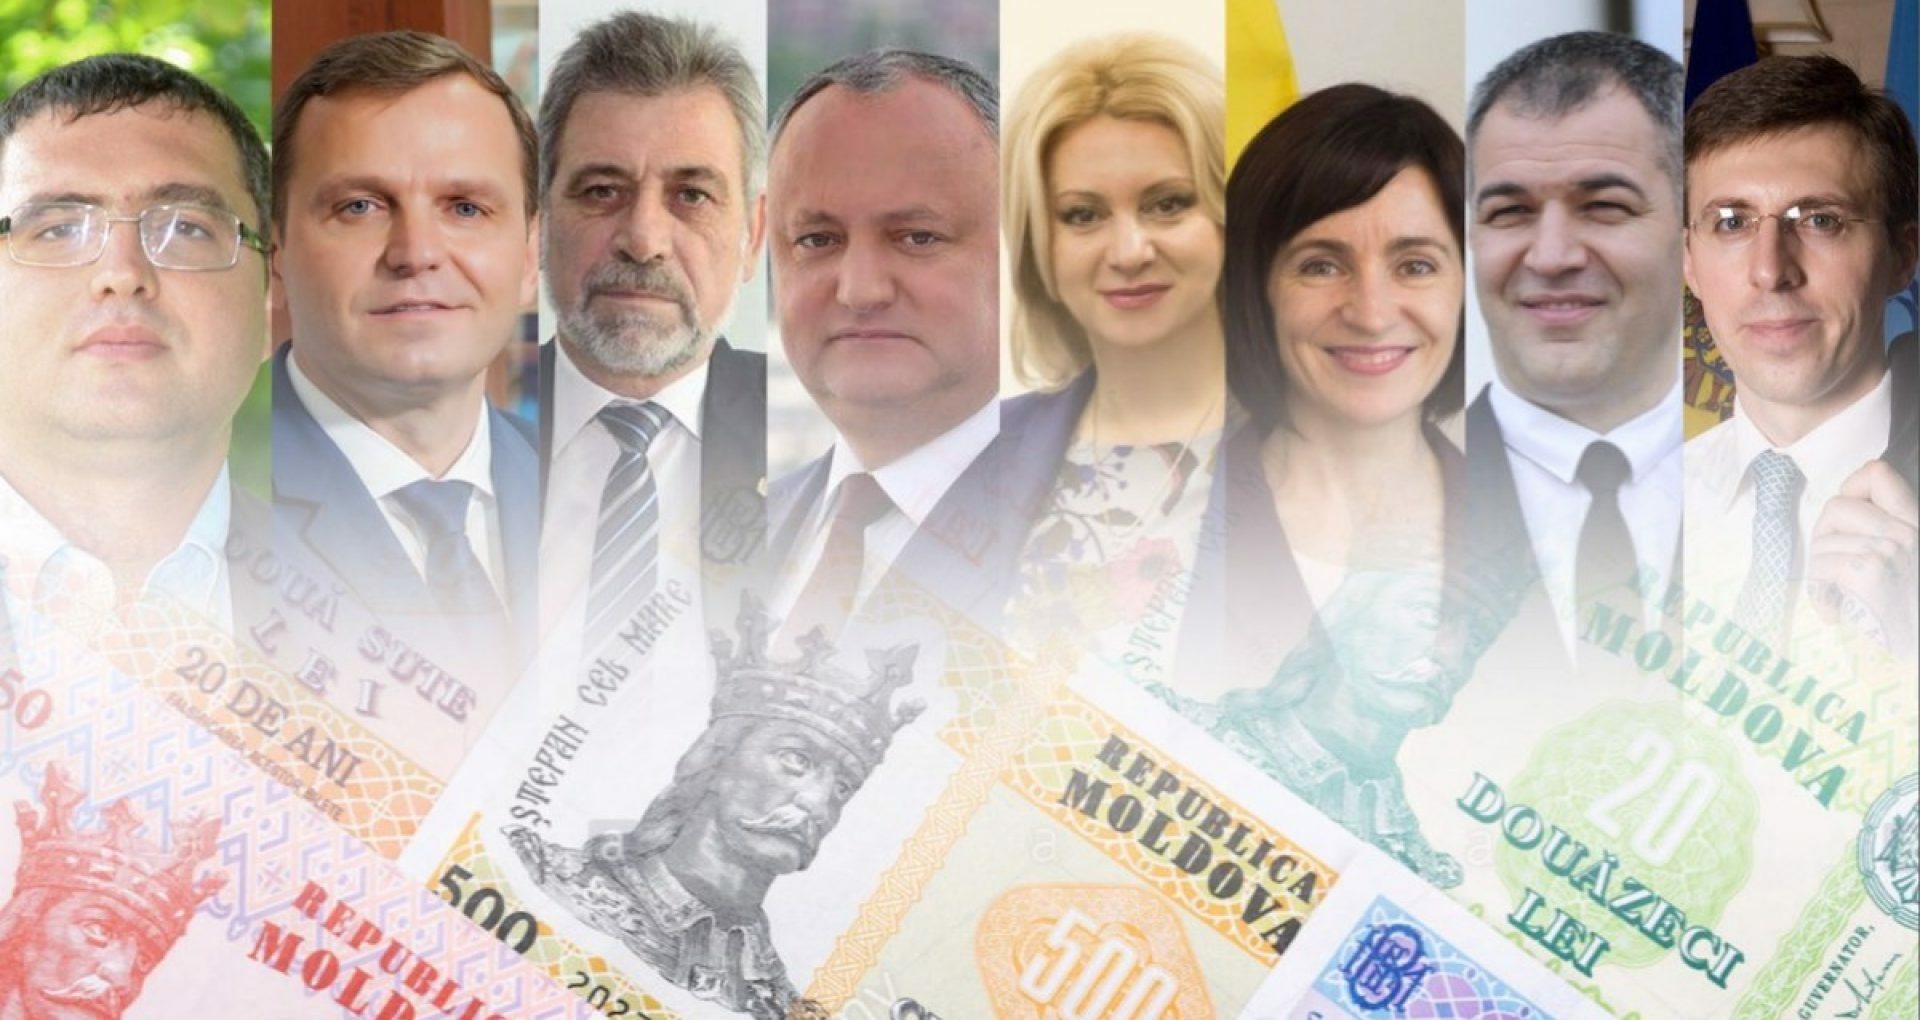 The Presidential Elections Cost Moldova Over 7 Million Euros